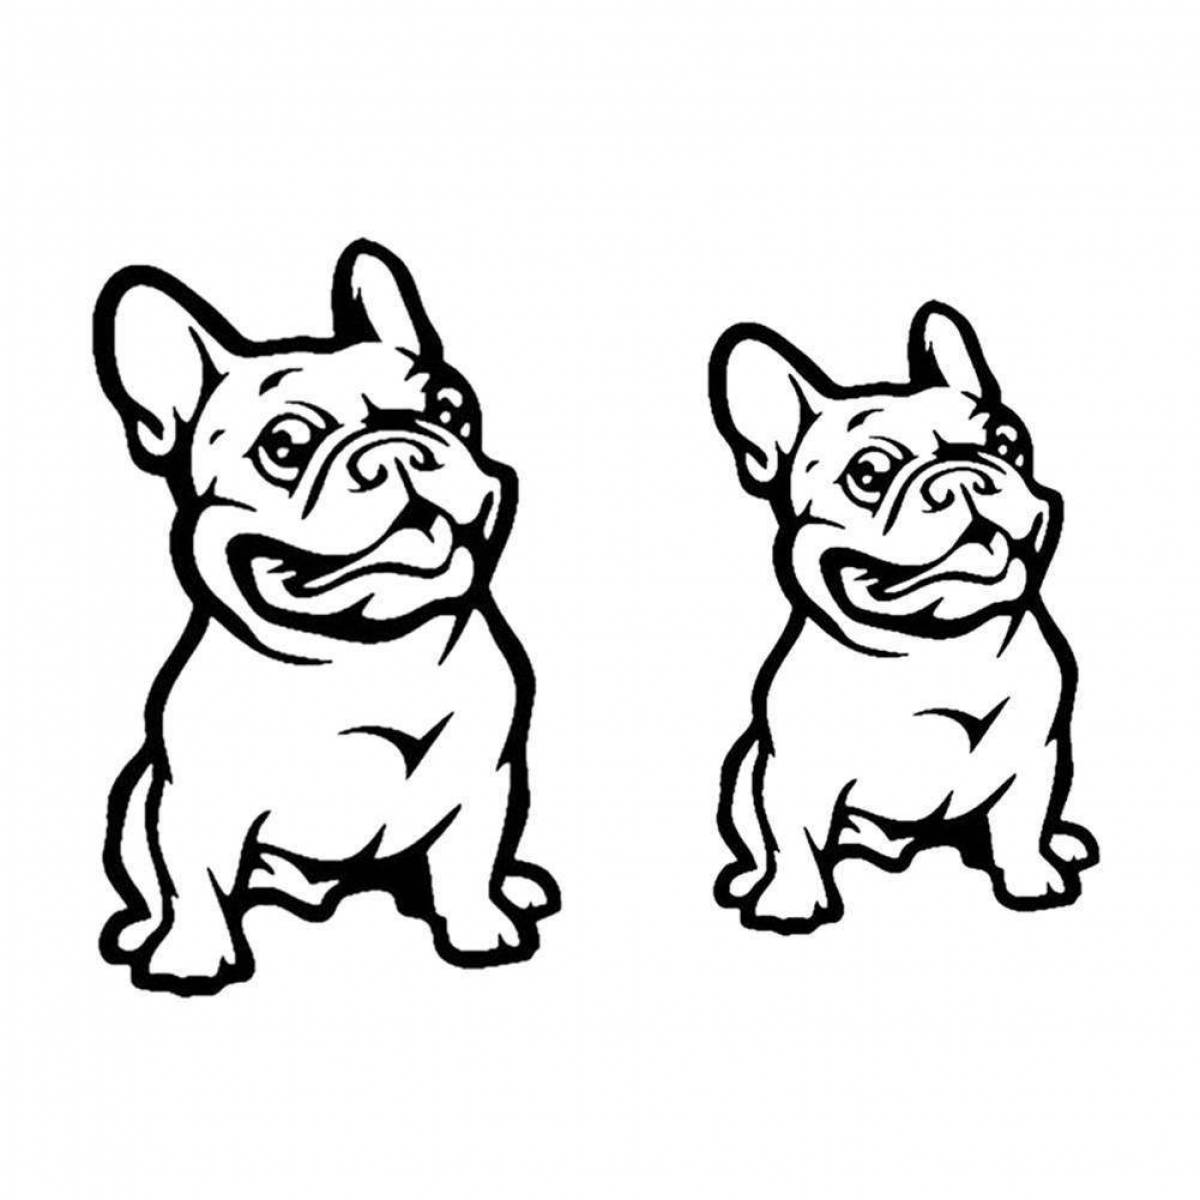 Coloring page adorable french bulldog